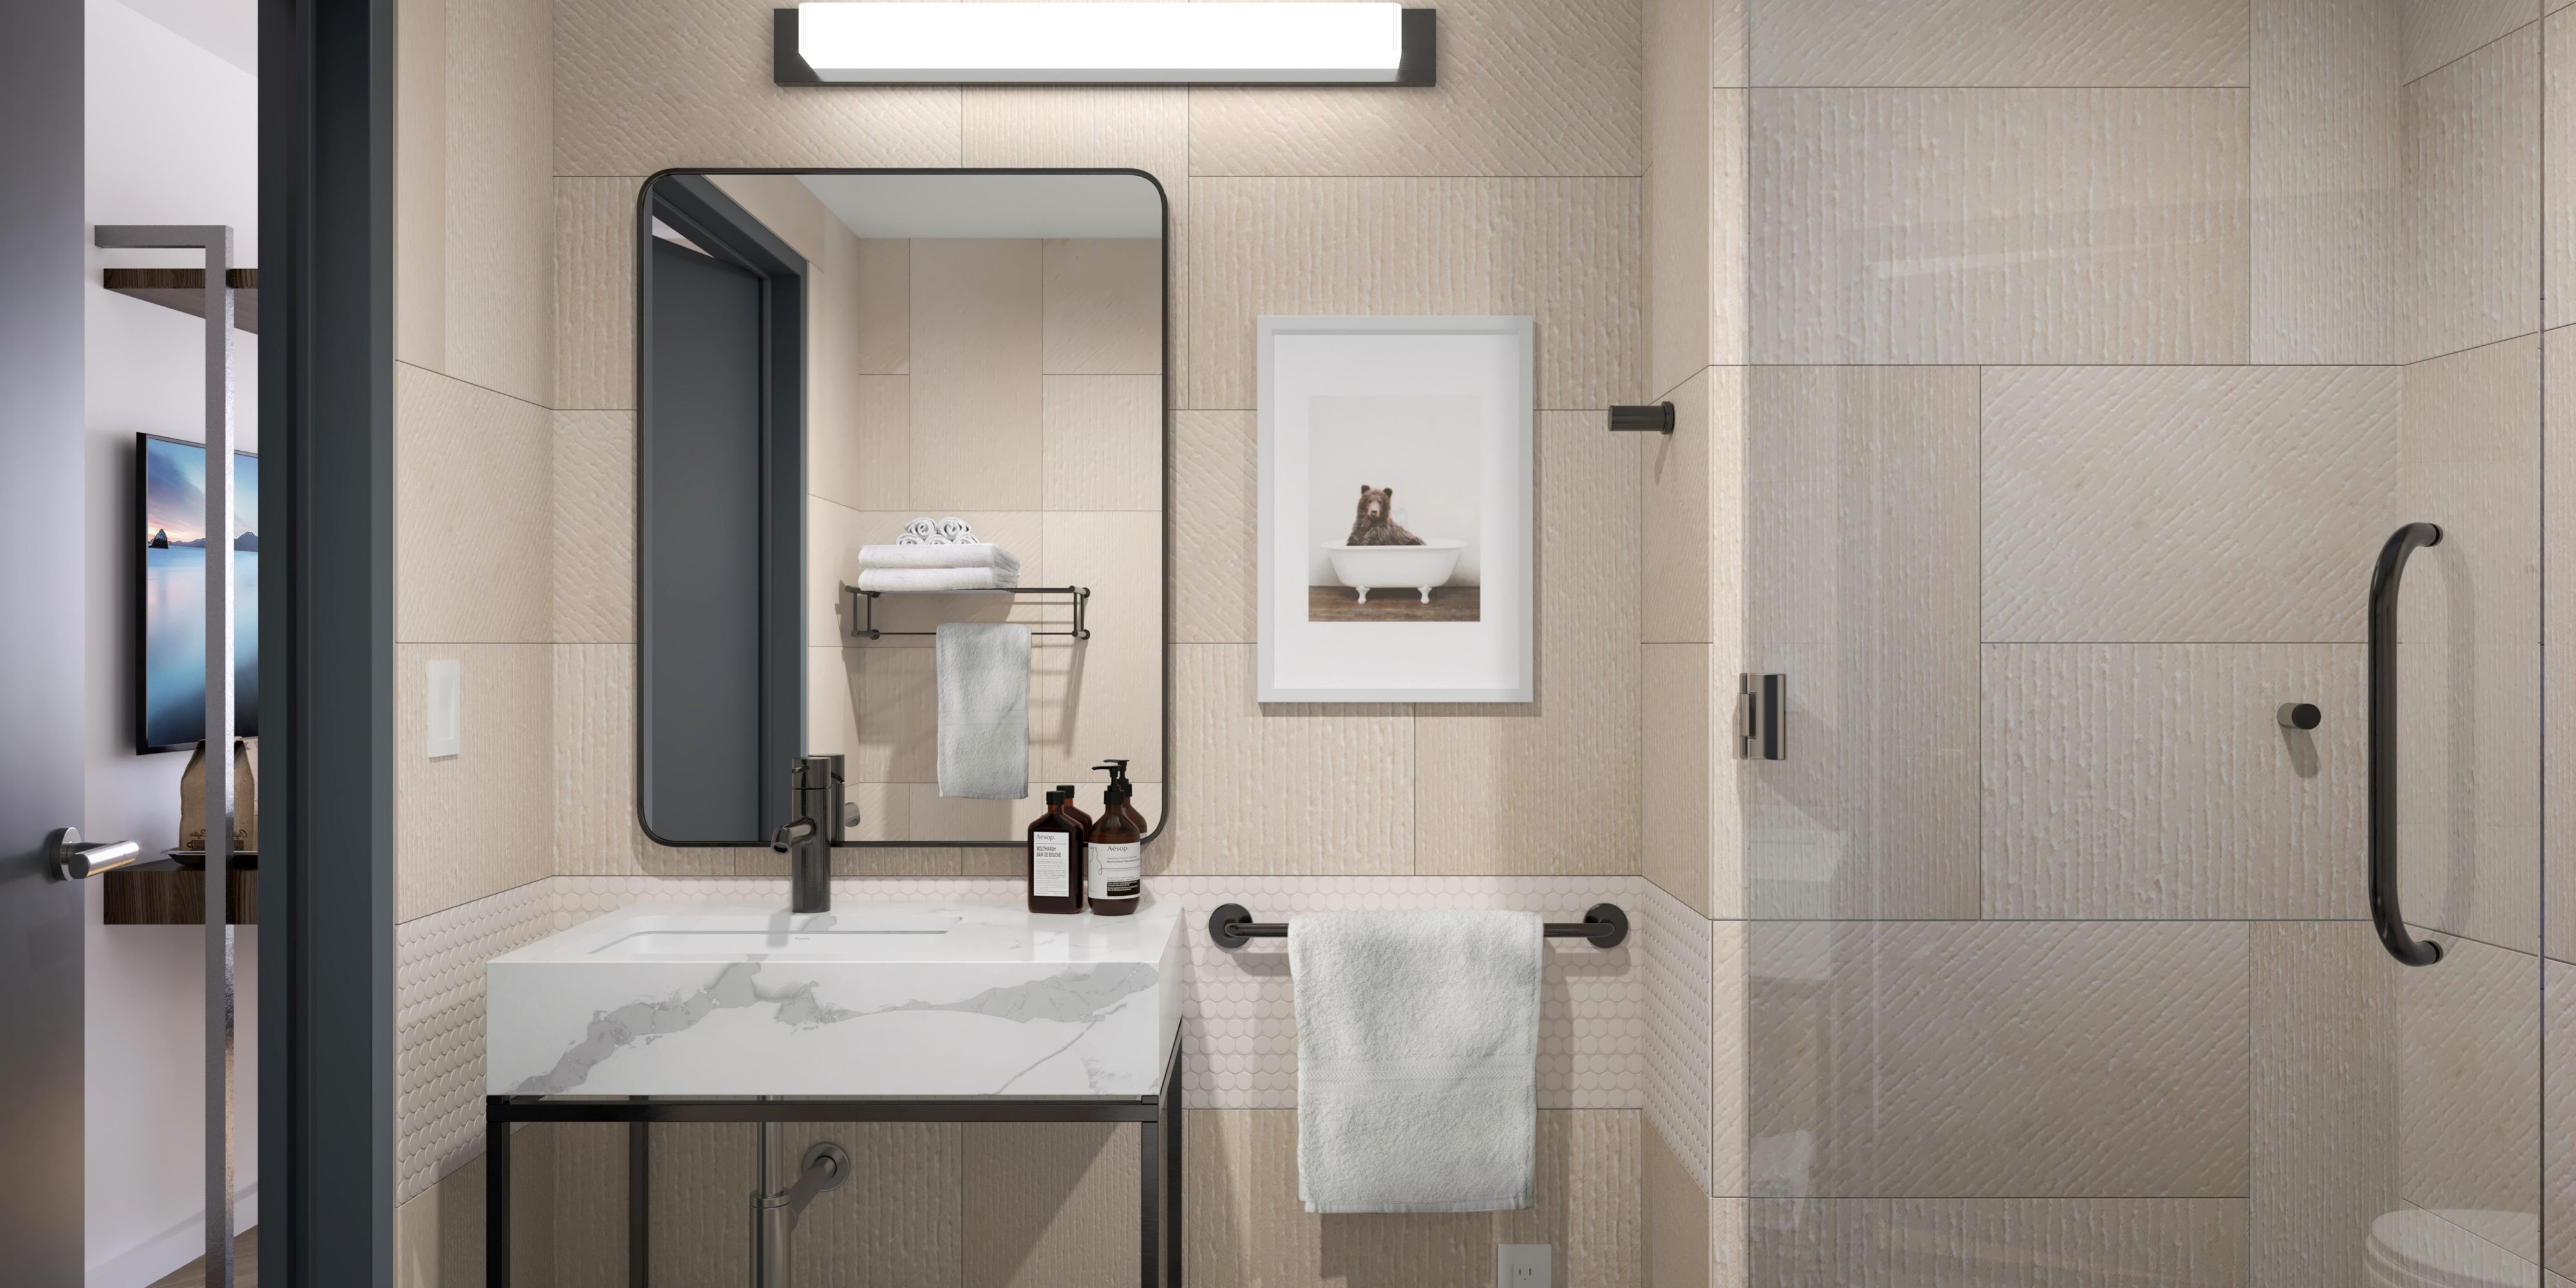 Modern design &amp; upscale bath amenities at our renovated NYC hotel